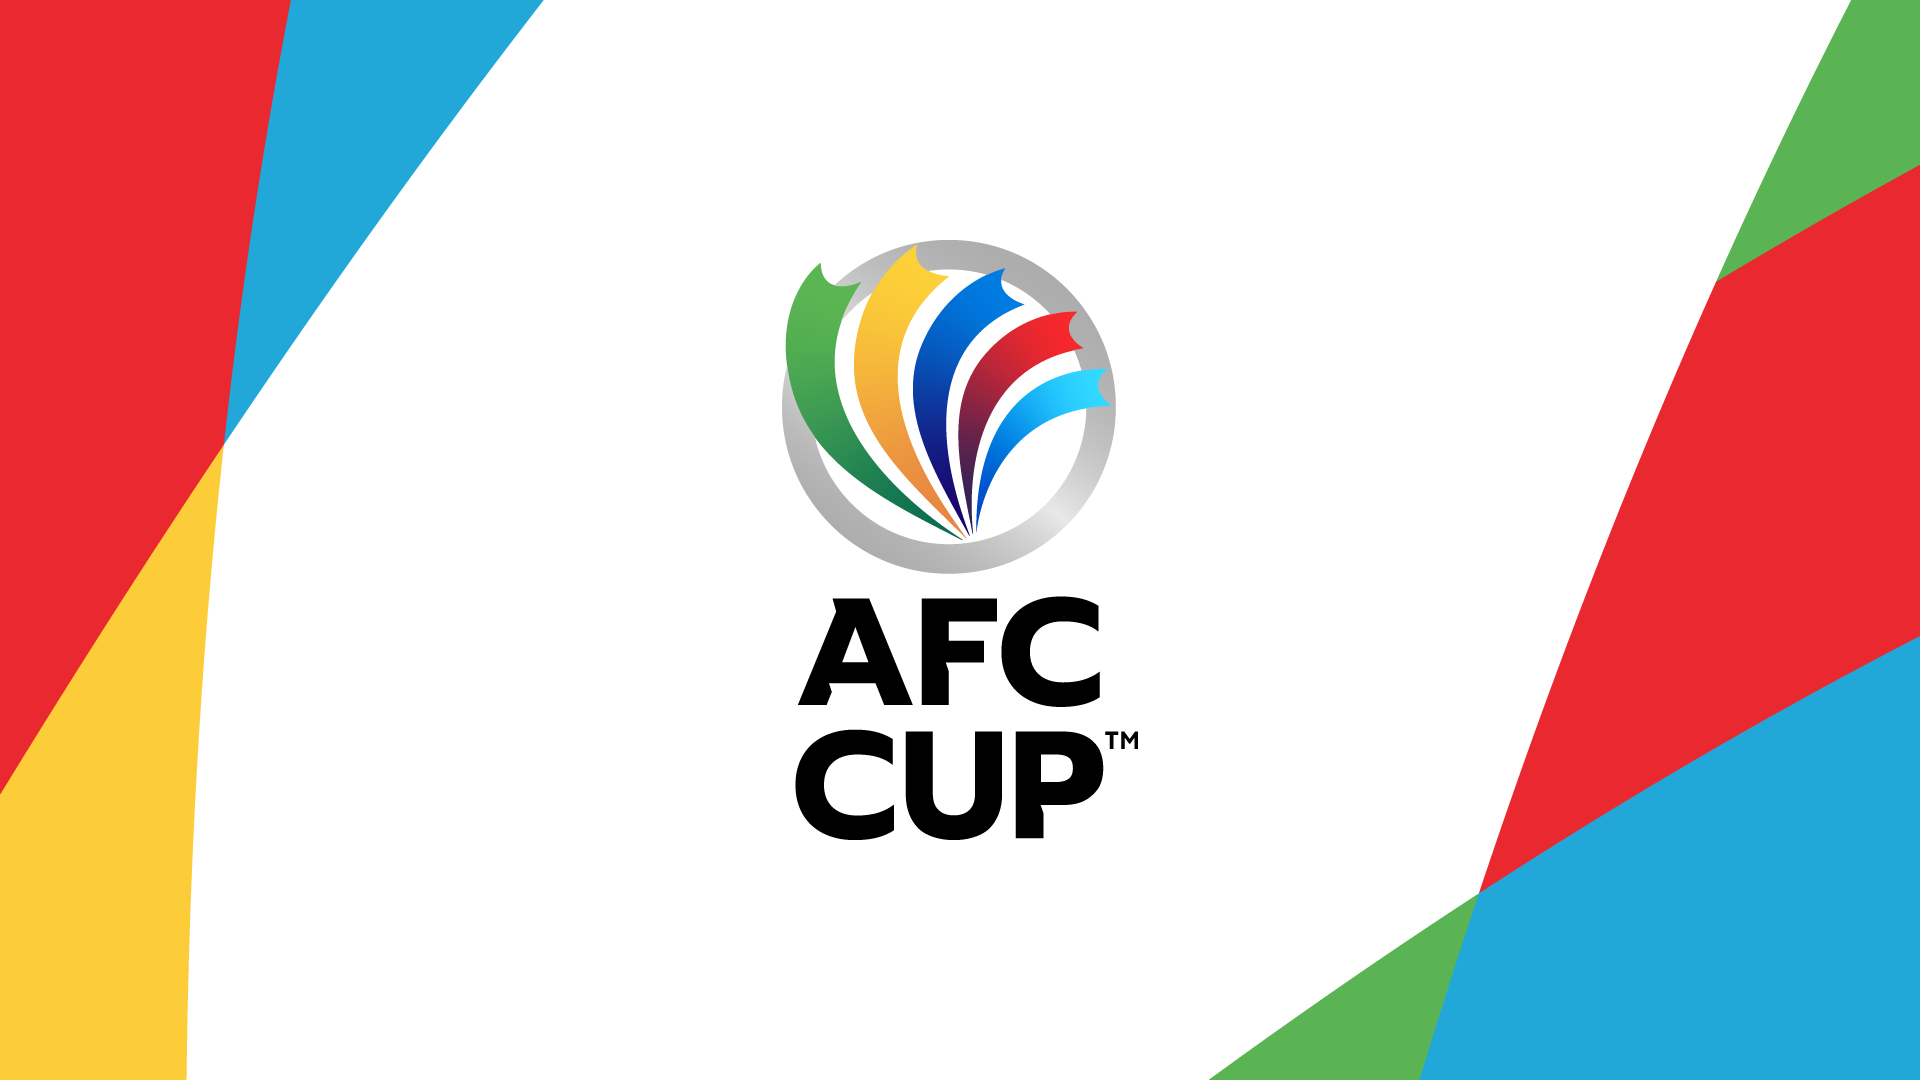 Asian Champions League, AFC Get New Logos in Rebranding Drive - News18